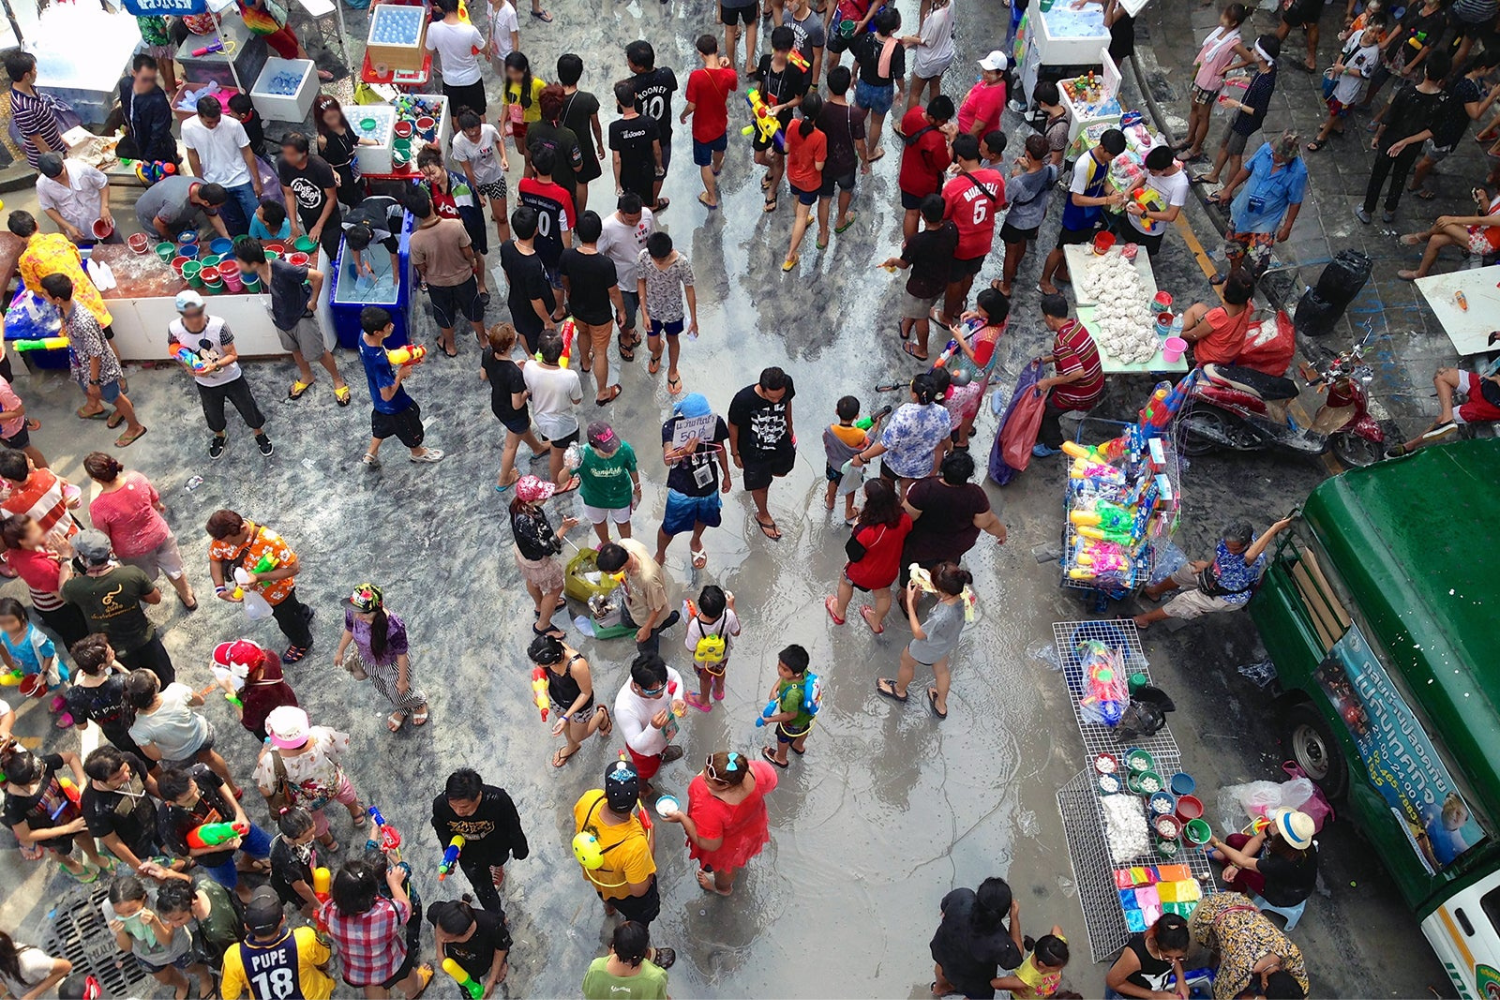 Aerial view of a crowded market selling Asian market goods.